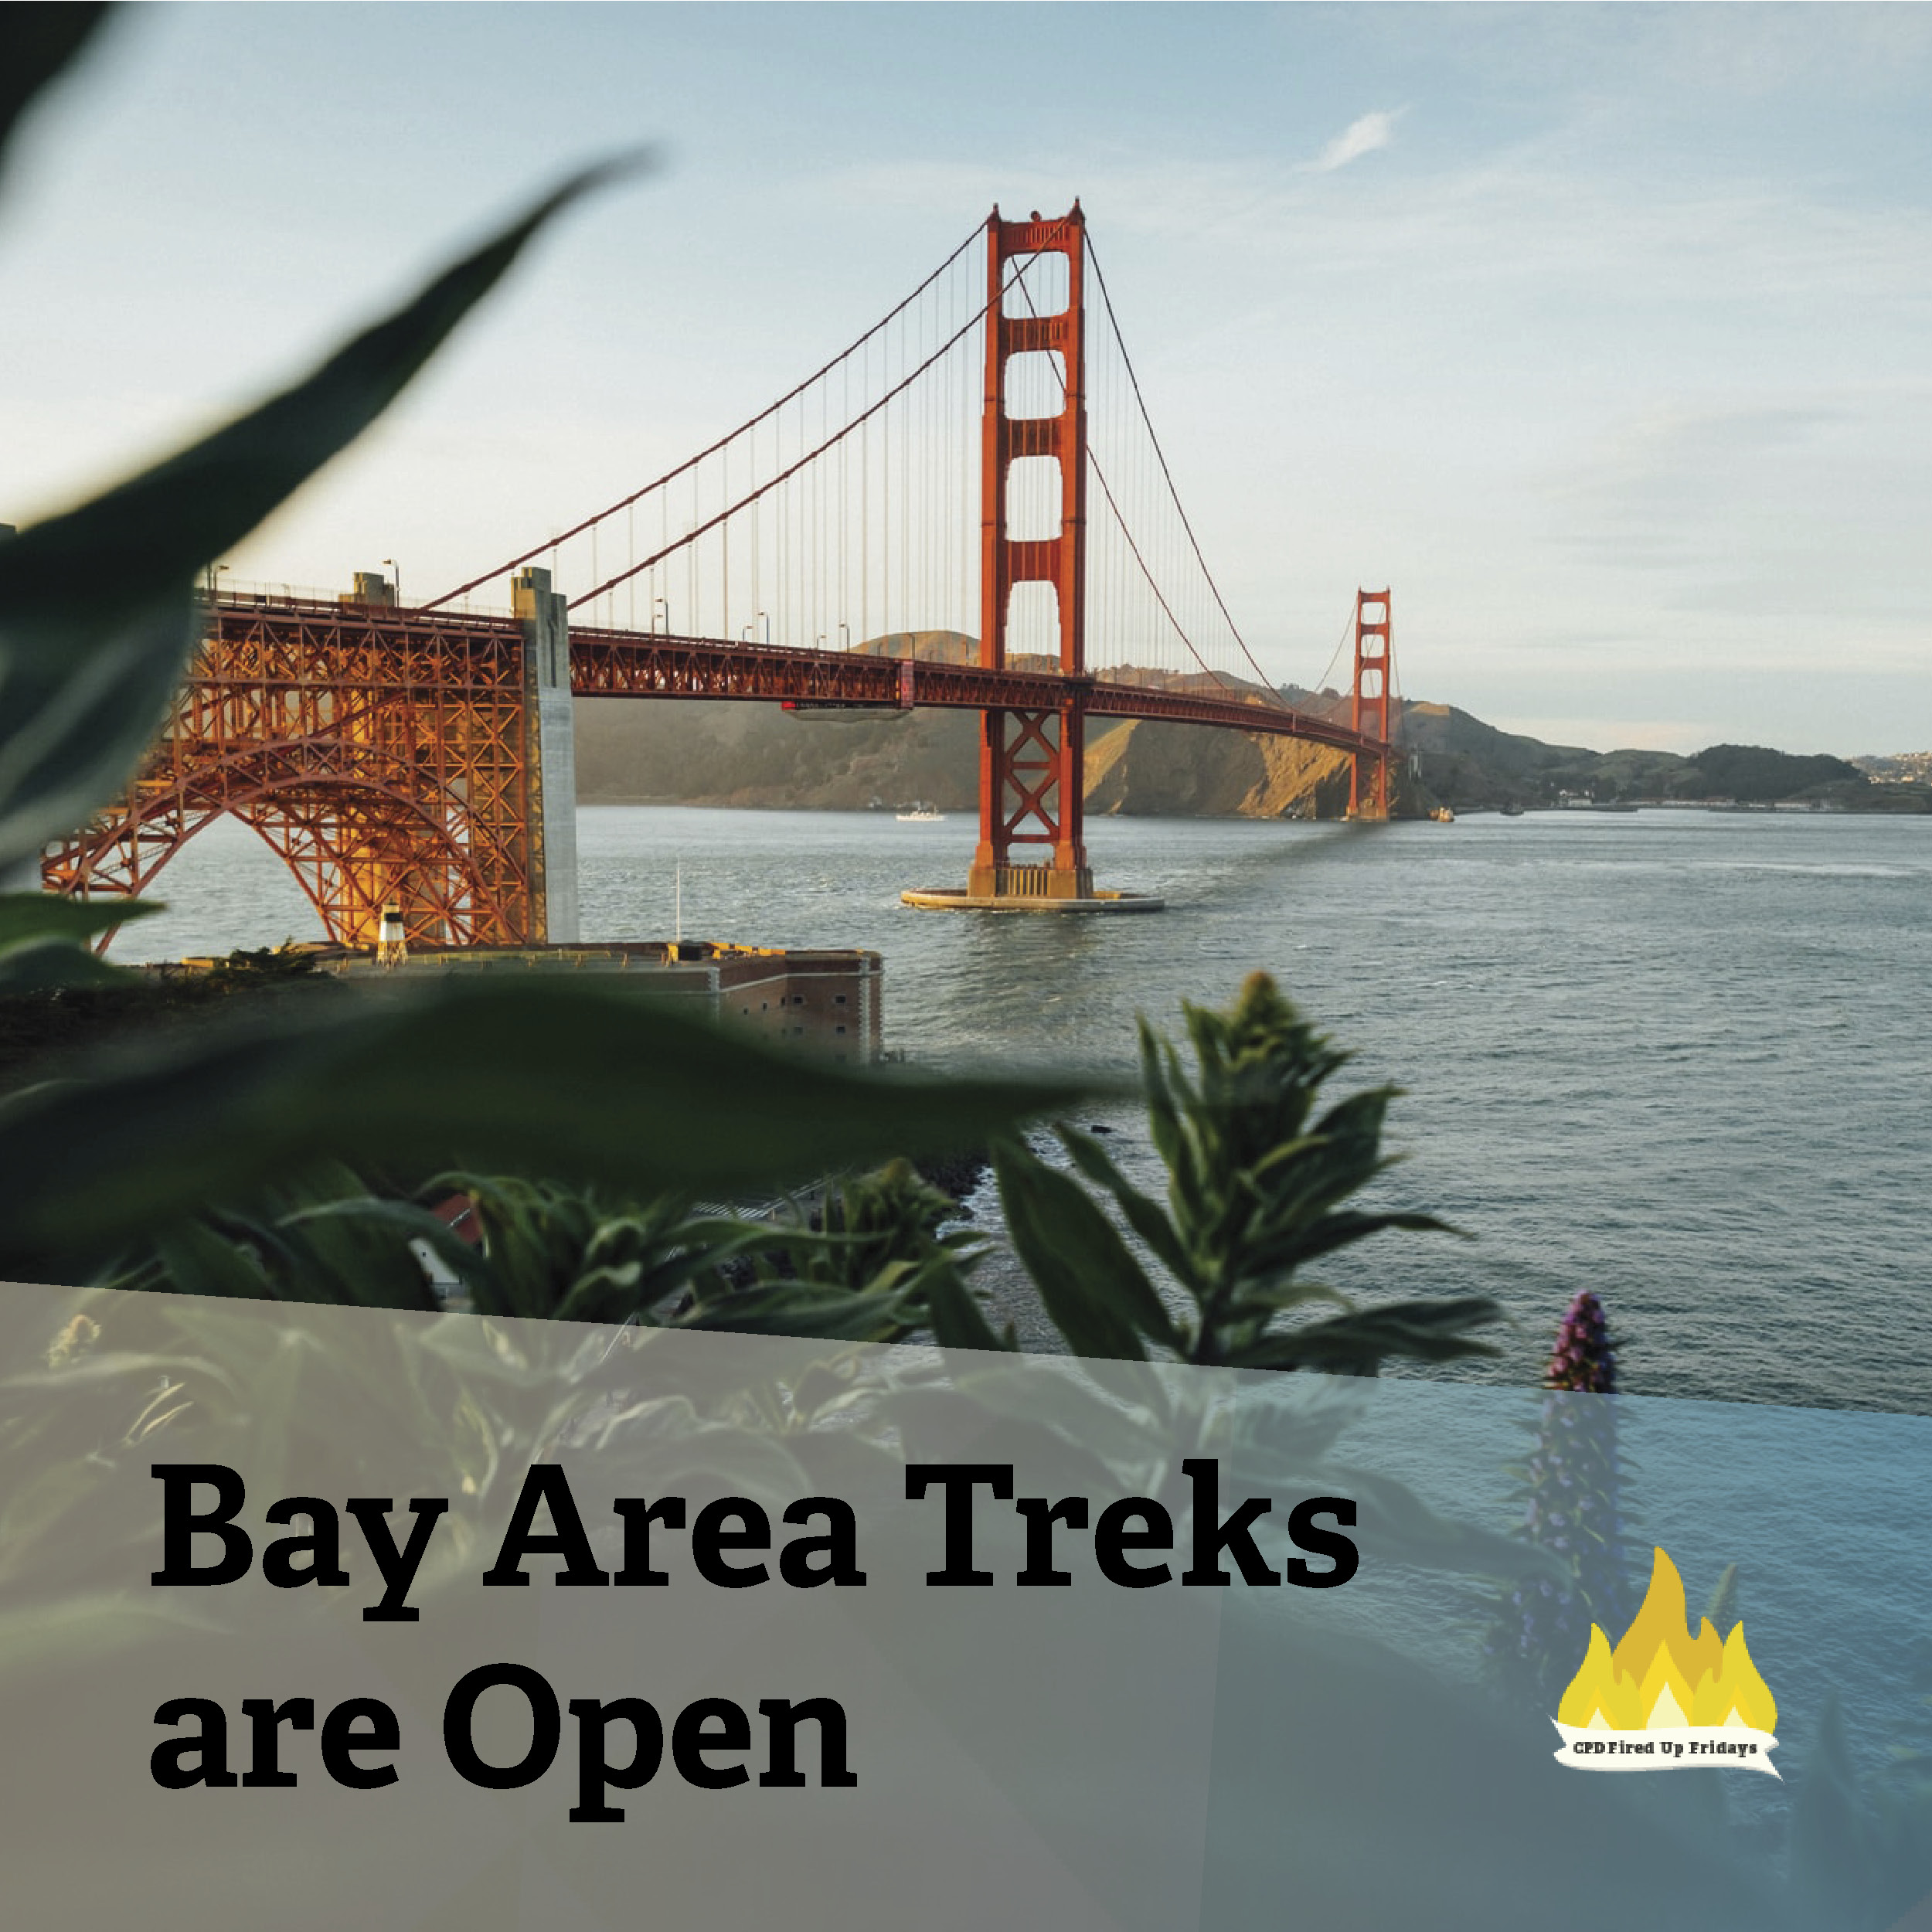 In the distance, the Golden Gate Bridge stretches across the water into the city of San Francisco. Underneath, text reads: 'Bay Area Treks are Open'